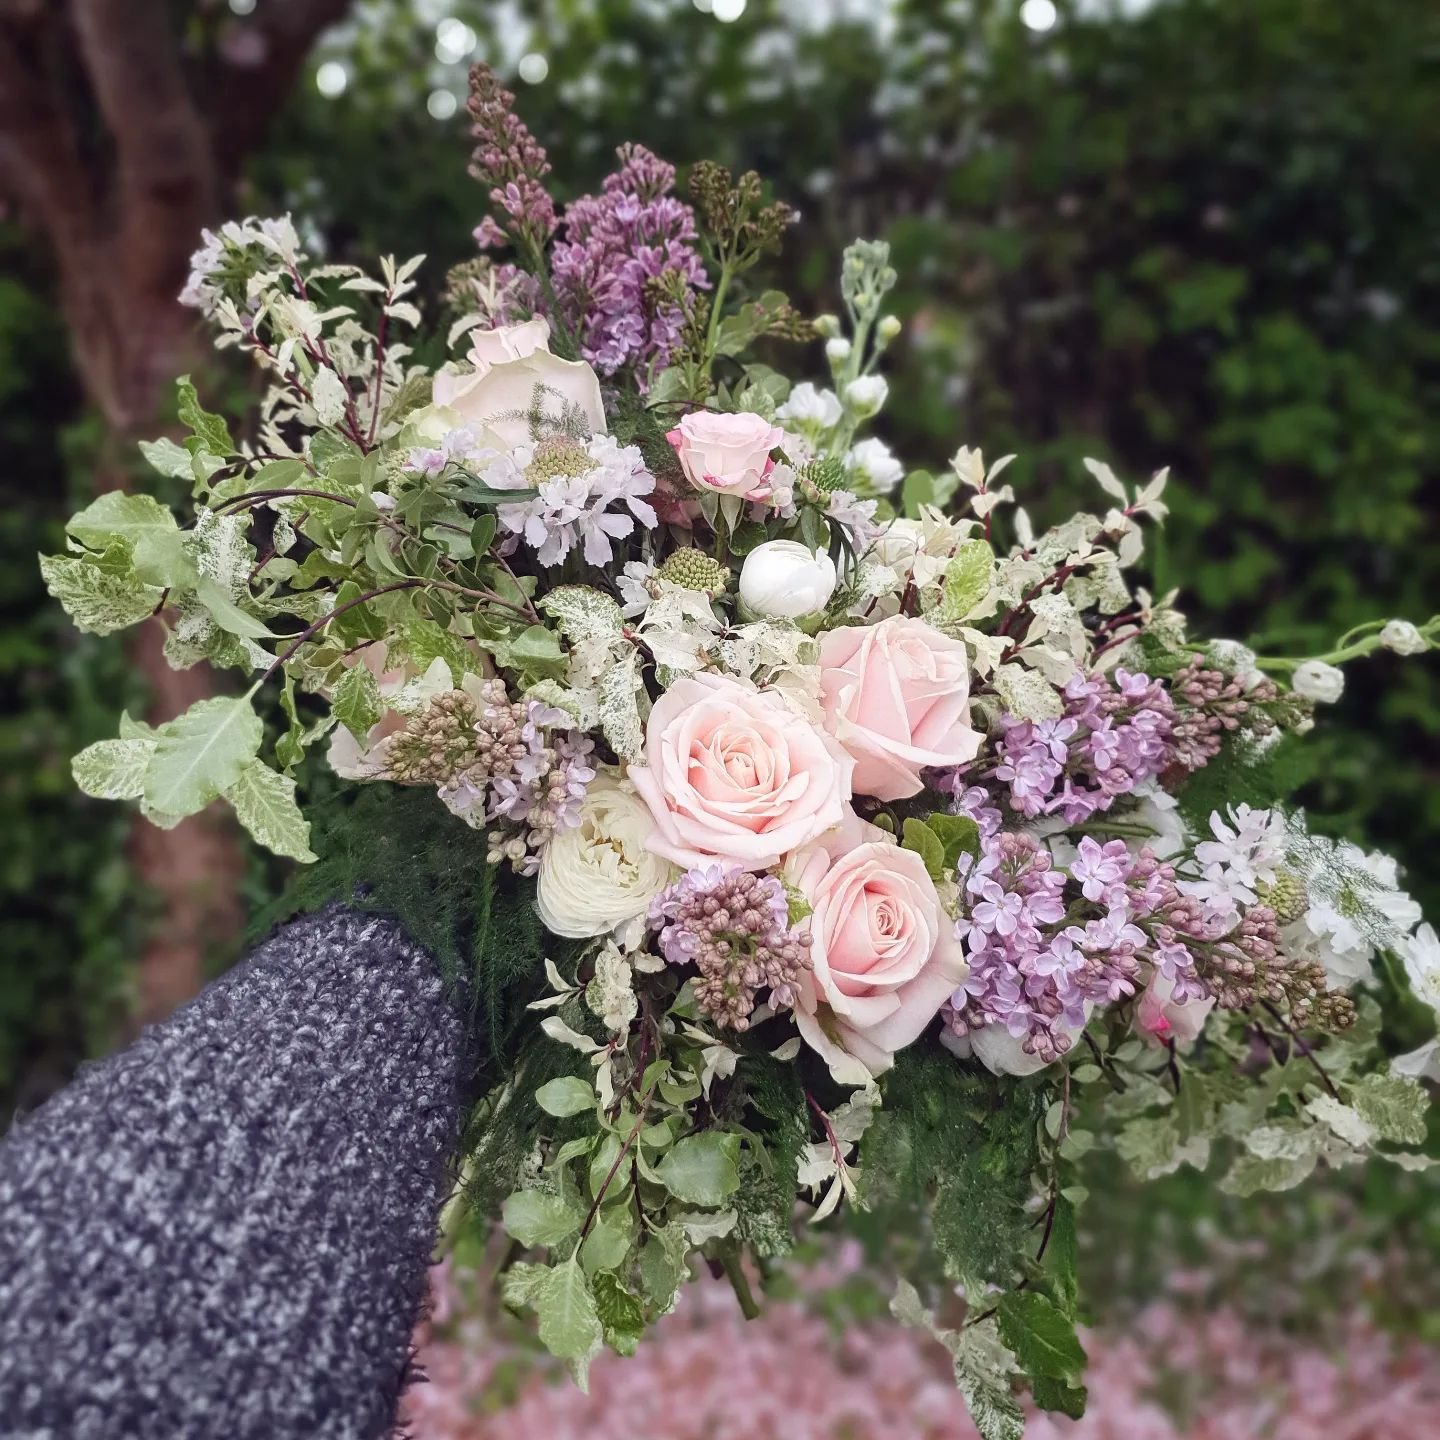 One for all my whimsical brides!

#weddings #wedding #weddingbouquet #weddingflorist #weddingflowers #weddingsupplier #maywedding #weddinginspo #bridalbouquet #bridalflowers #weddingflorals #weddingideas #wildweddings #wildweddingflowers #whimsicalwe